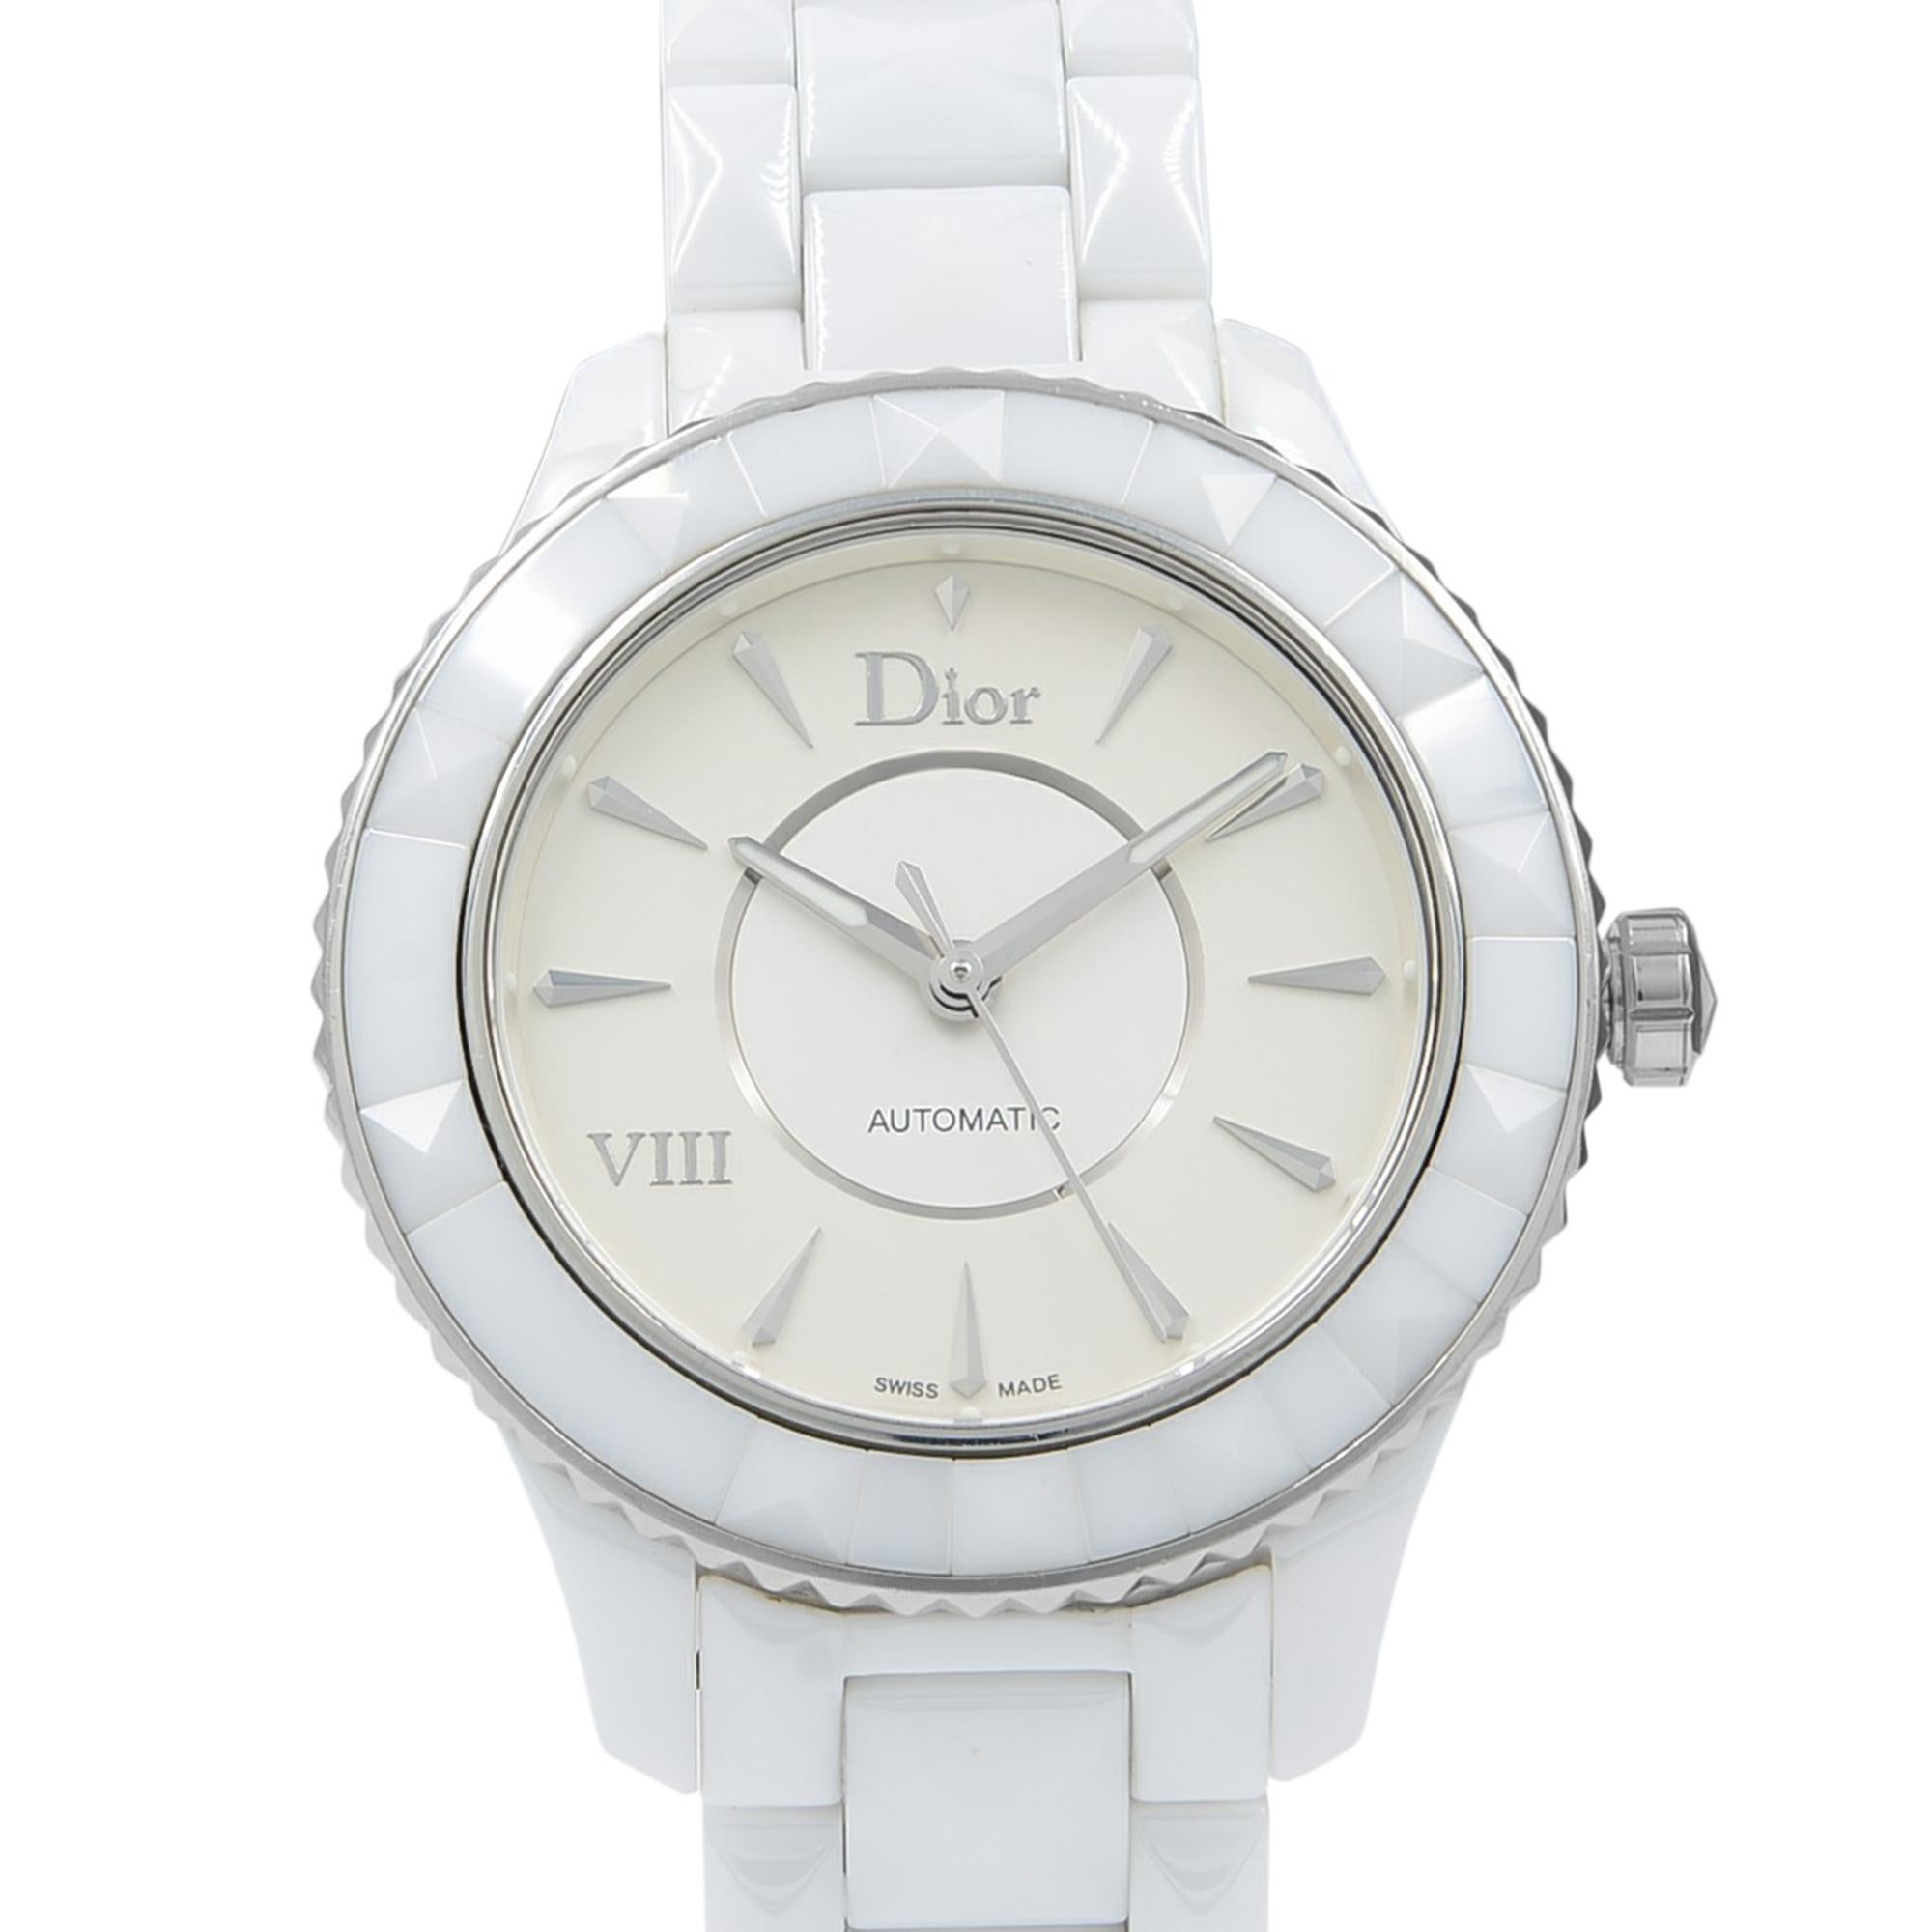 This pre-owned Christian Dior VIII CD1245E3C001 is a beautiful Ladies timepiece that is powered by an automatic movement which is cased in a ceramic case. It has a round shape face, no features dial and has hand sticks style markers. It is completed